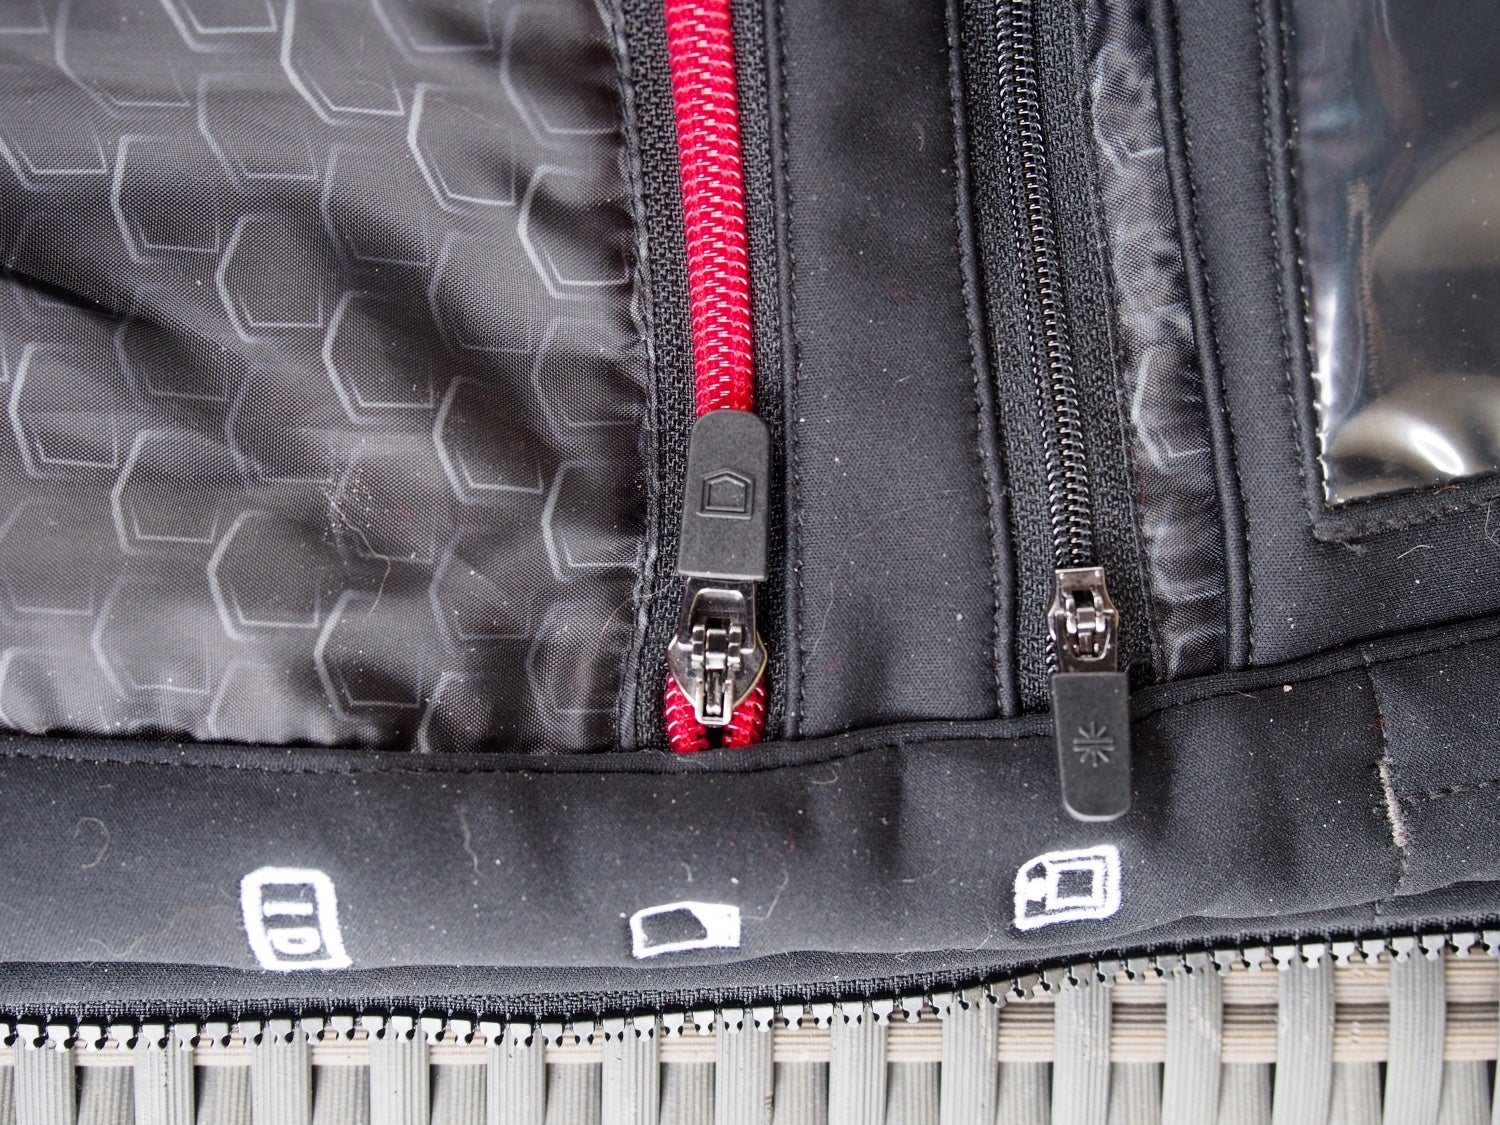 Along each side of the jacket are icons to indicate the use of that pocket.